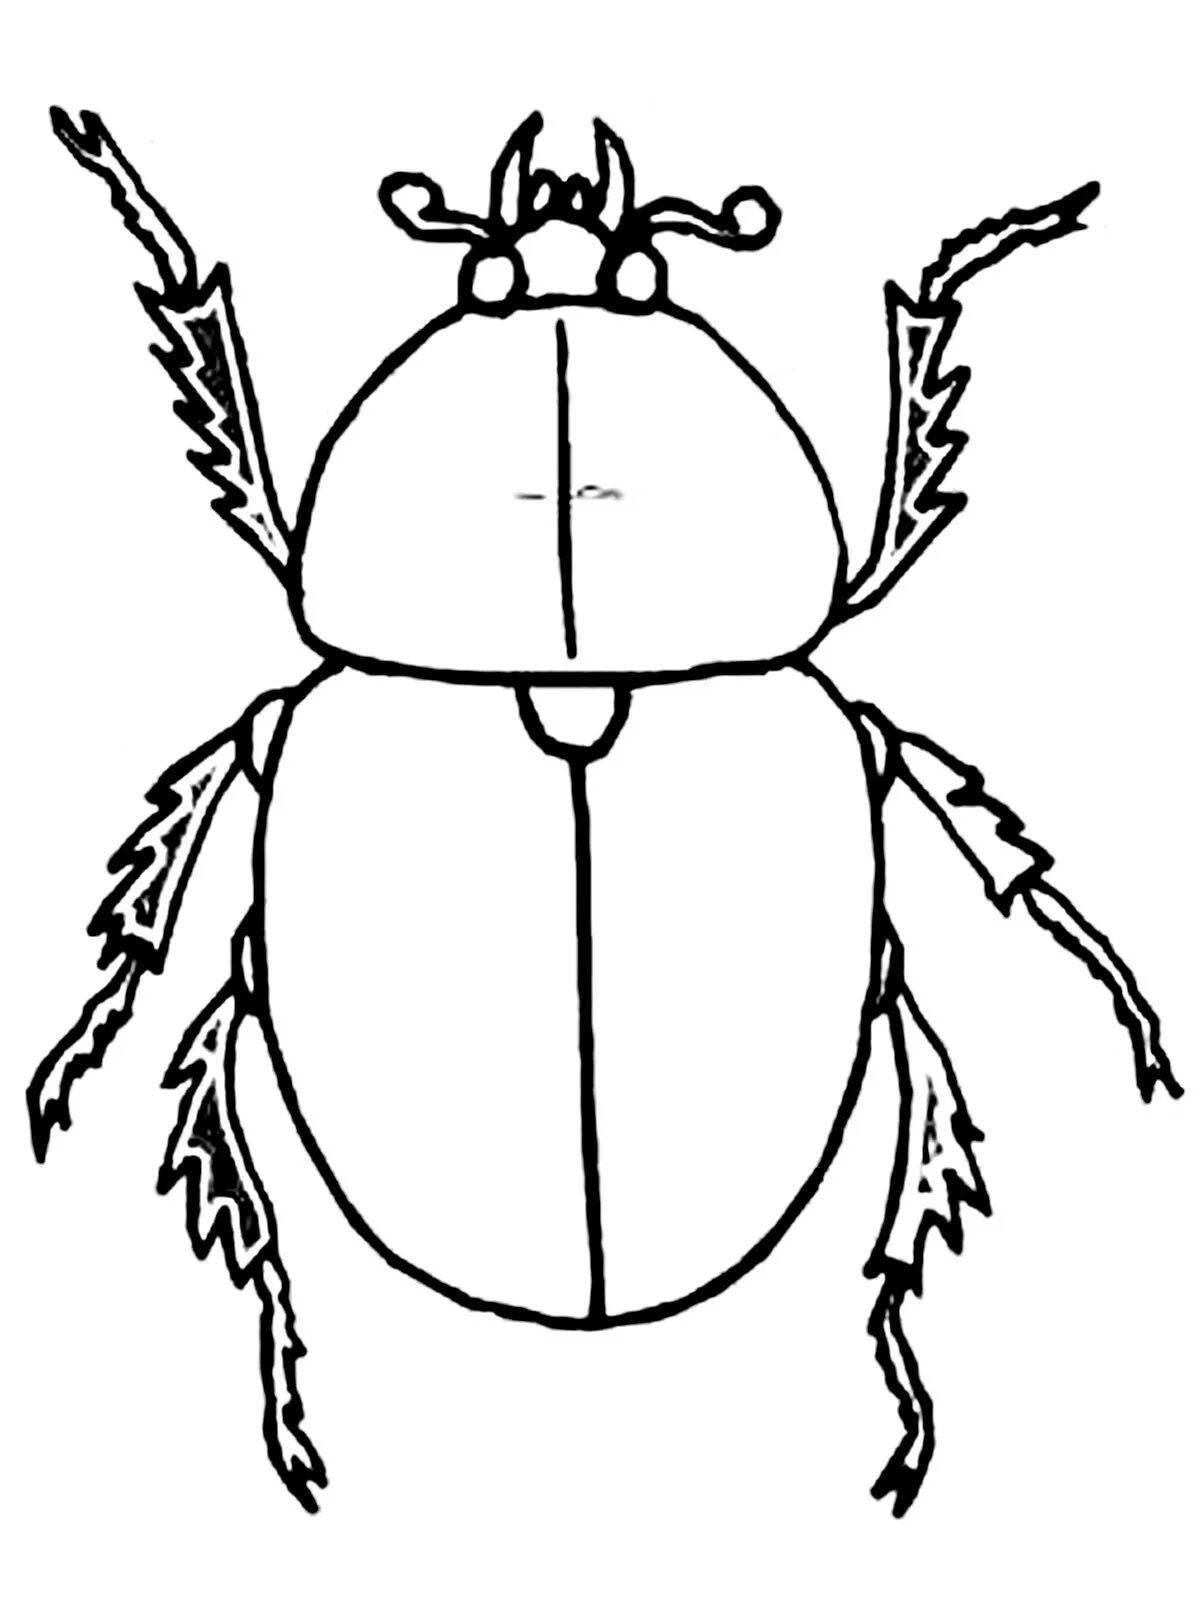 Magic coloring beetles for children 3-4 years old